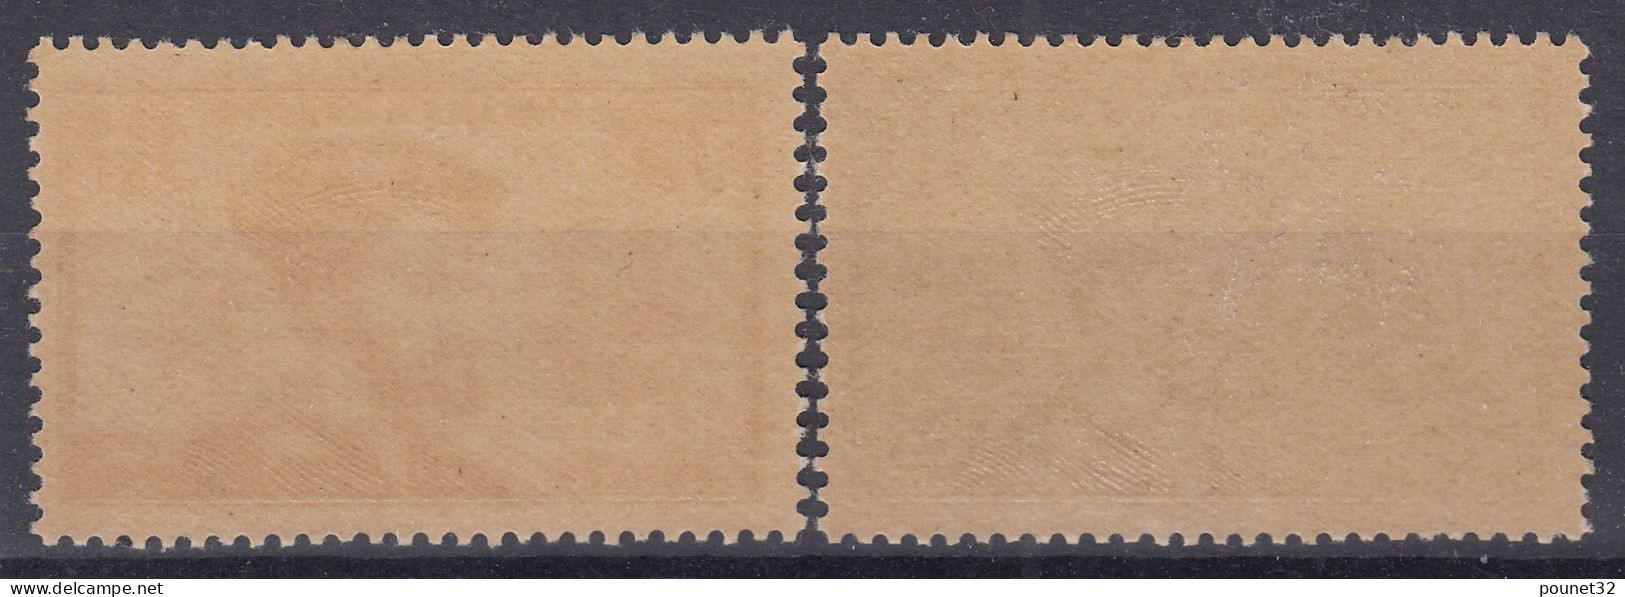 TIMBRE FRANCE PAQUEBOT NORMANDIE PAIRE N° 299 & 300 NEUFS ** GOMME SANS CHARNIERE - COTE 248 € - Unused Stamps